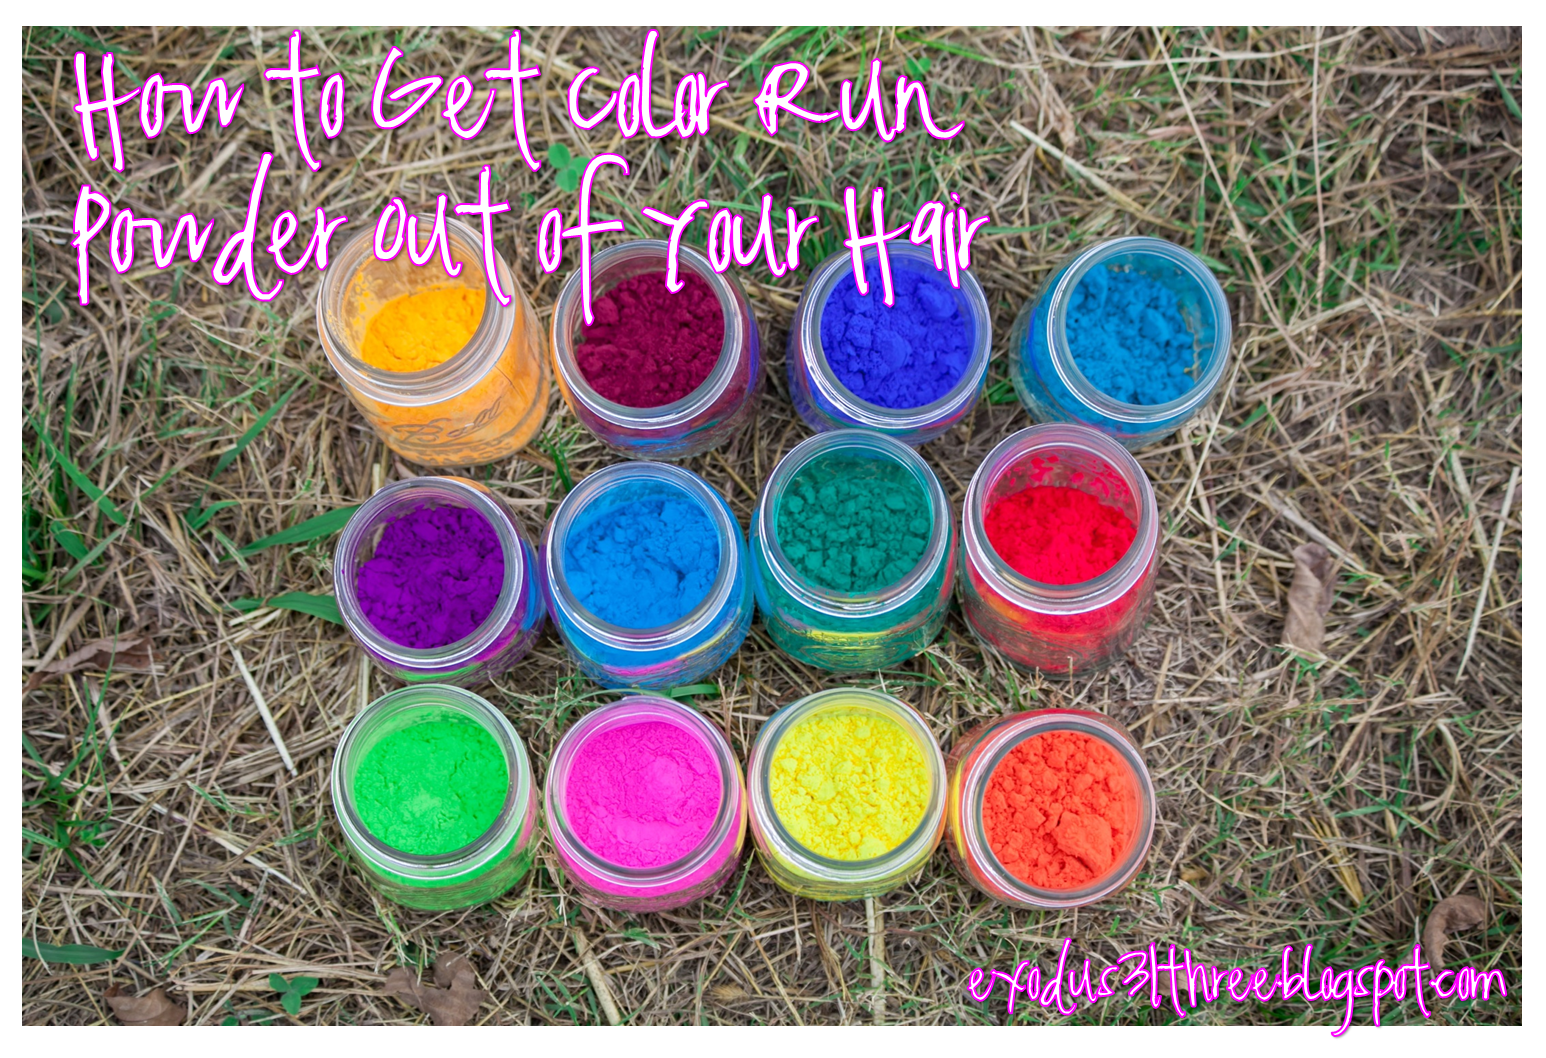 exodus31three: How to Get Color Run Powder Out of Your Hair